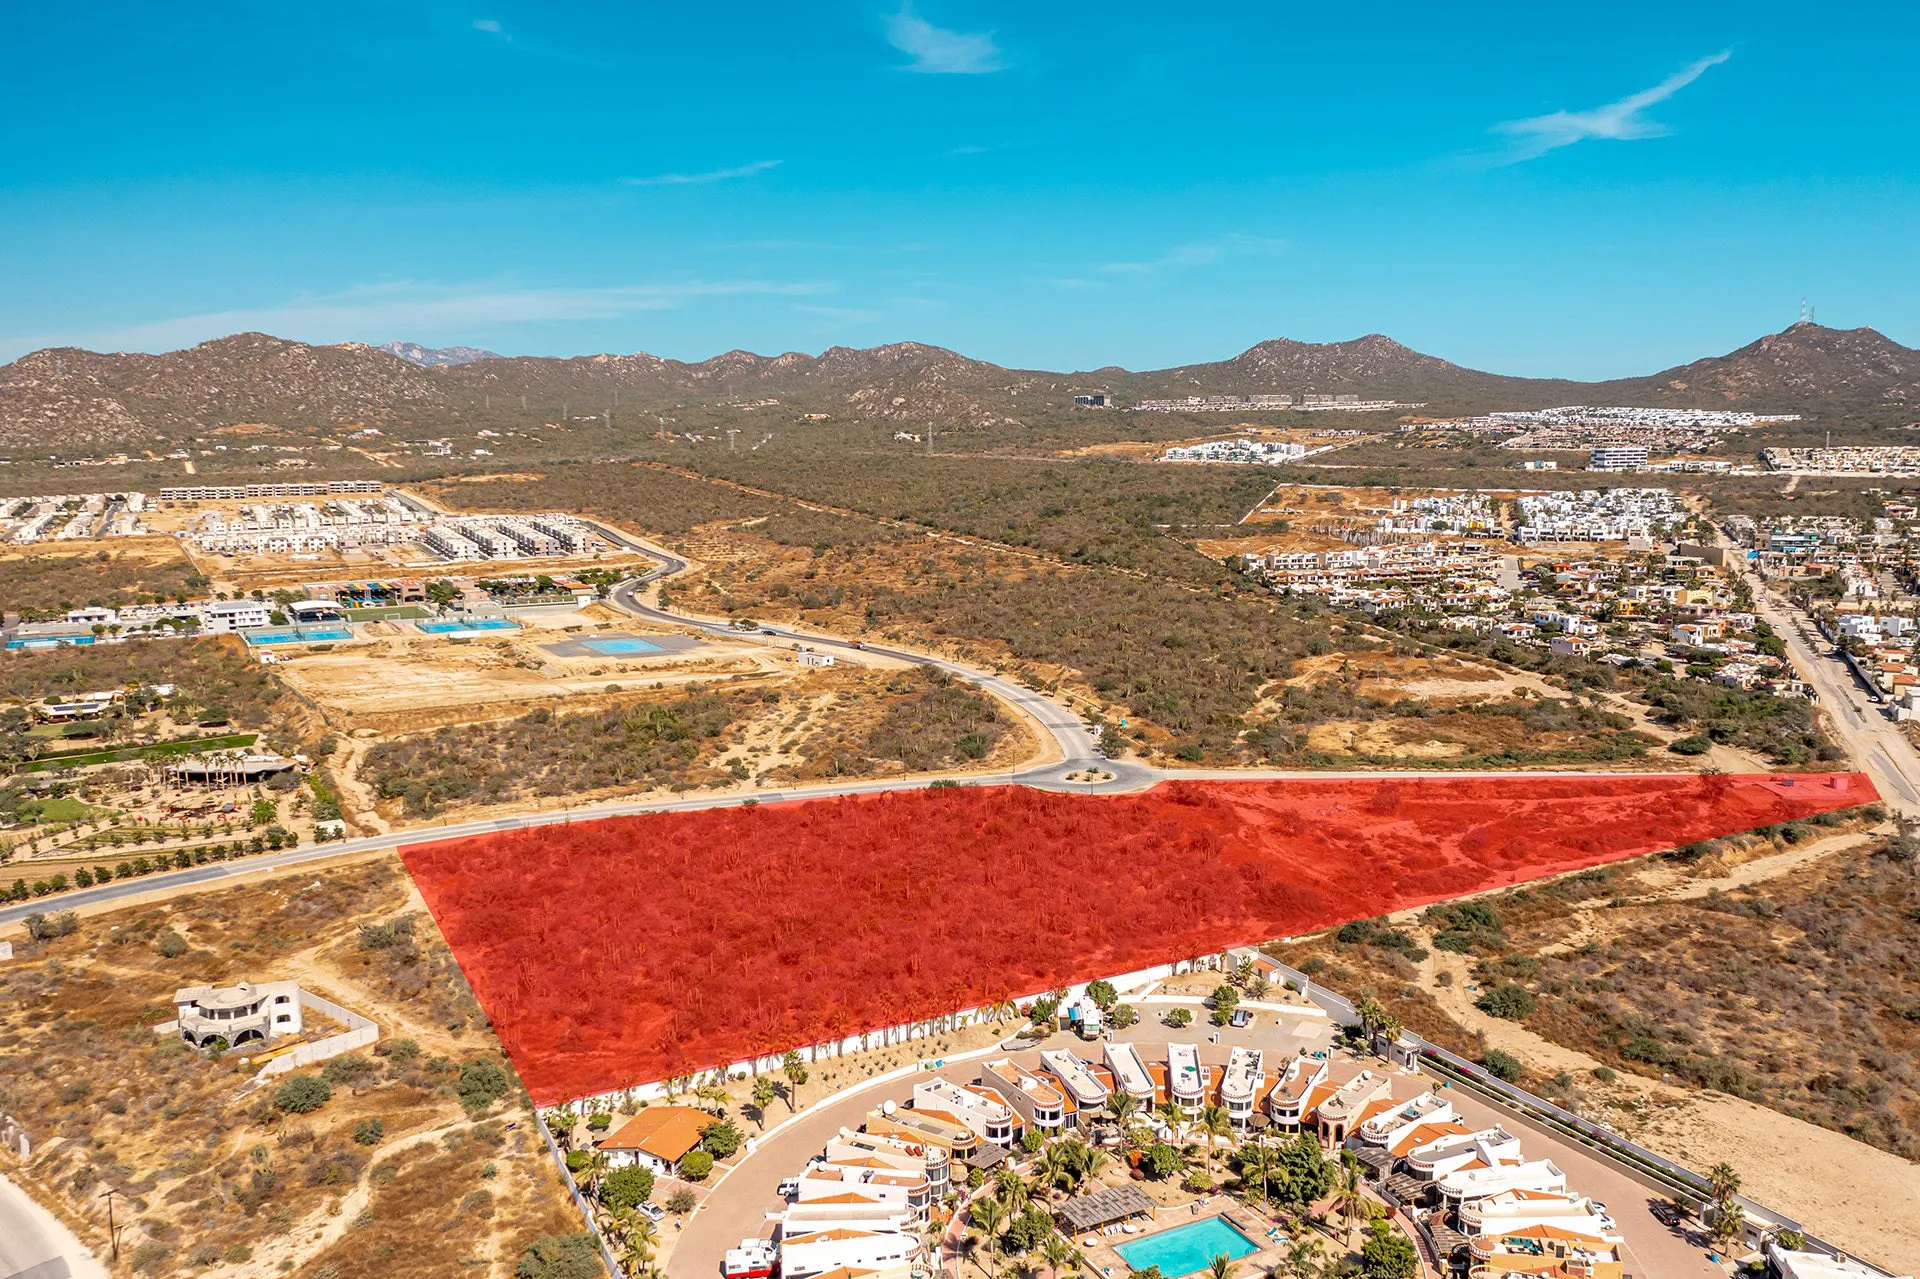 Lot I, is an excellent option for comercial and/or residential development. This 8.7 acre development parcel is located inside one of the most popular communities in Los Cabos.